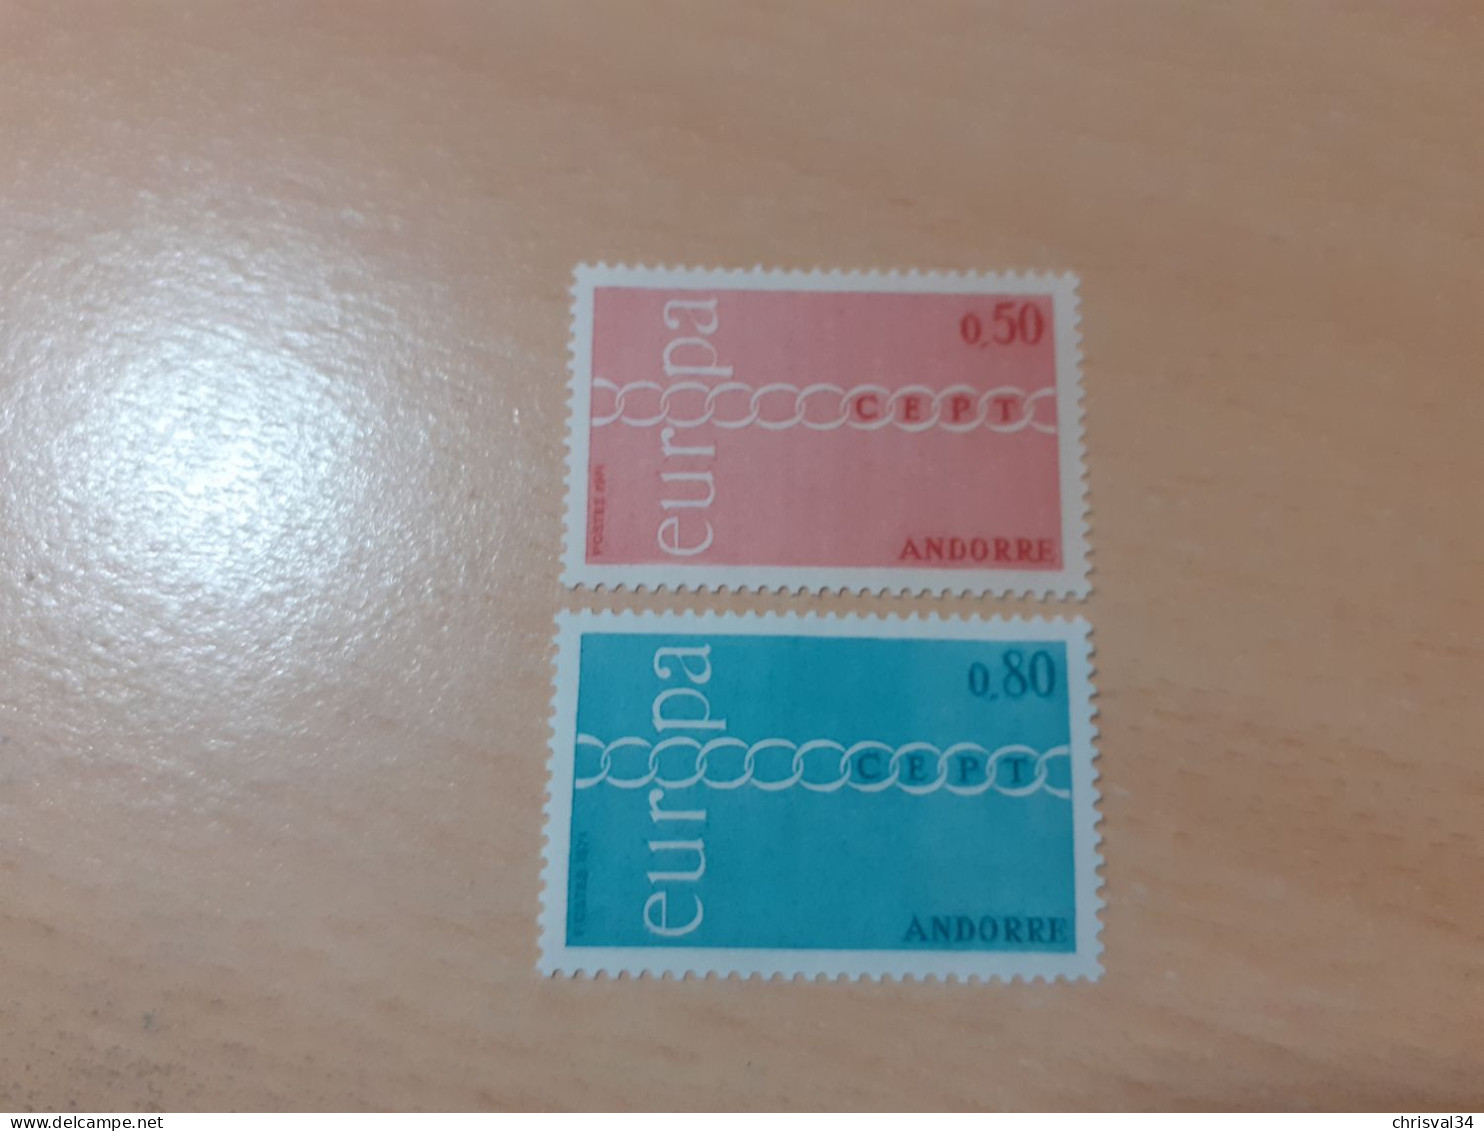 TIMBRES     ANDORRE  FRANCAIS  ANNEE   1971   N  212  /  213   COTE  50,00  EUROS   NEUFS  LUXE** - Neufs